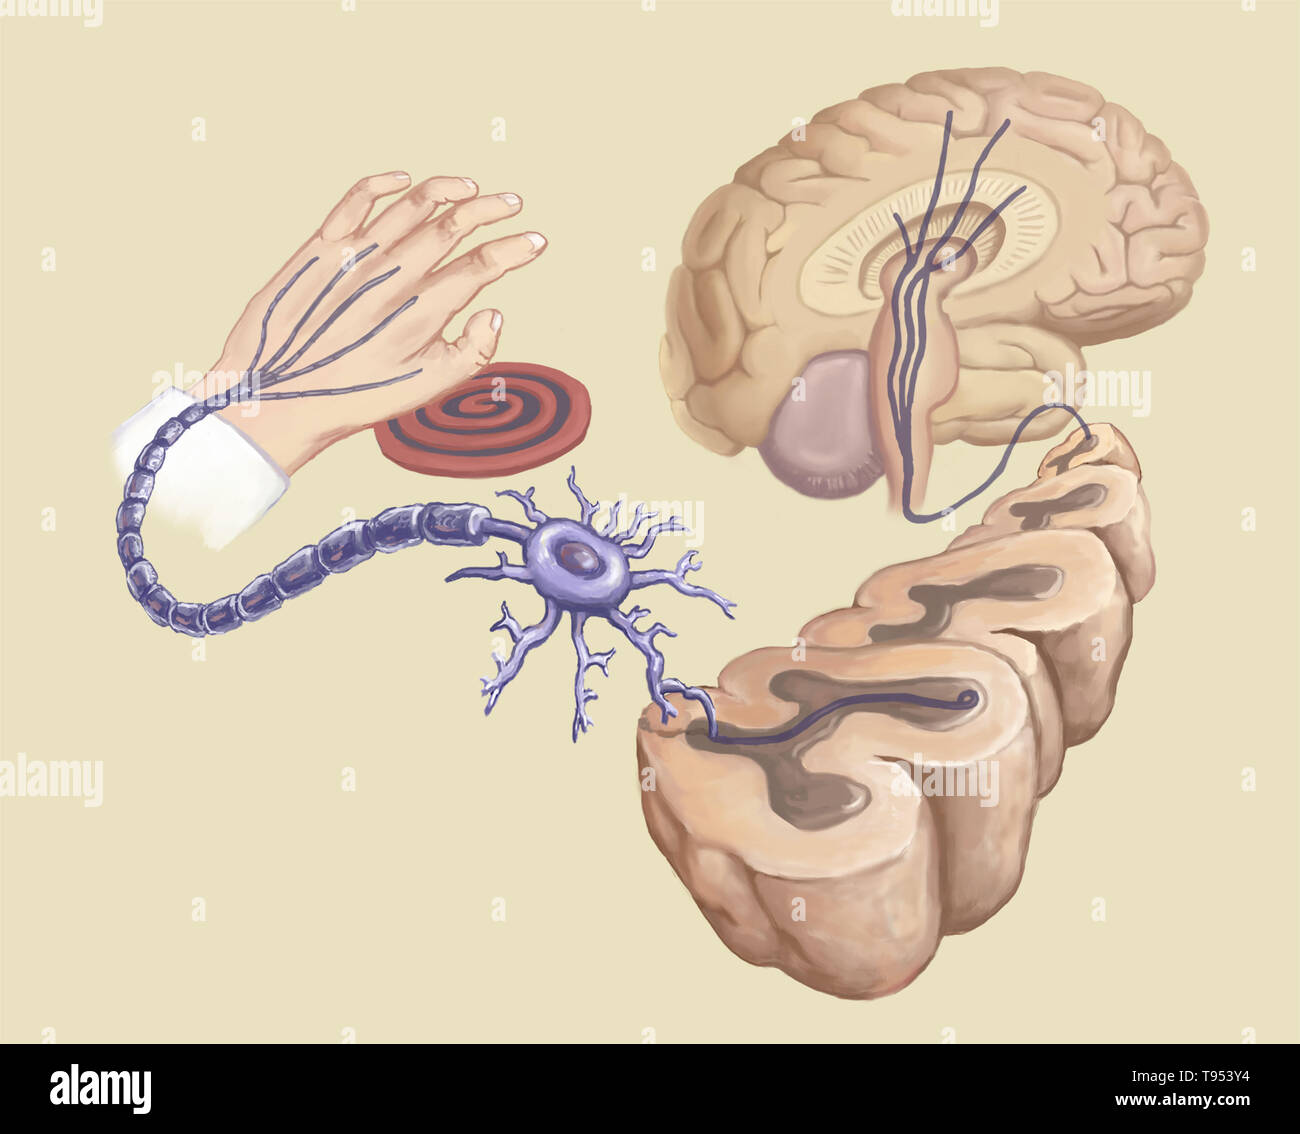 Illustration of a hand touching a hot stove element and reaction in the body's neural circuits. Stock Photo